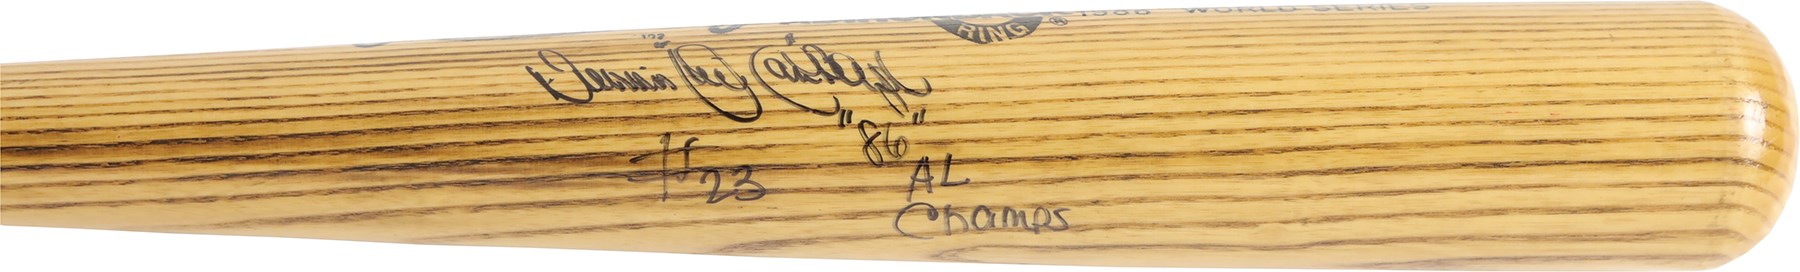 - 1986 "Oil Can" Boyd Autographed Game Issued World Series Bat